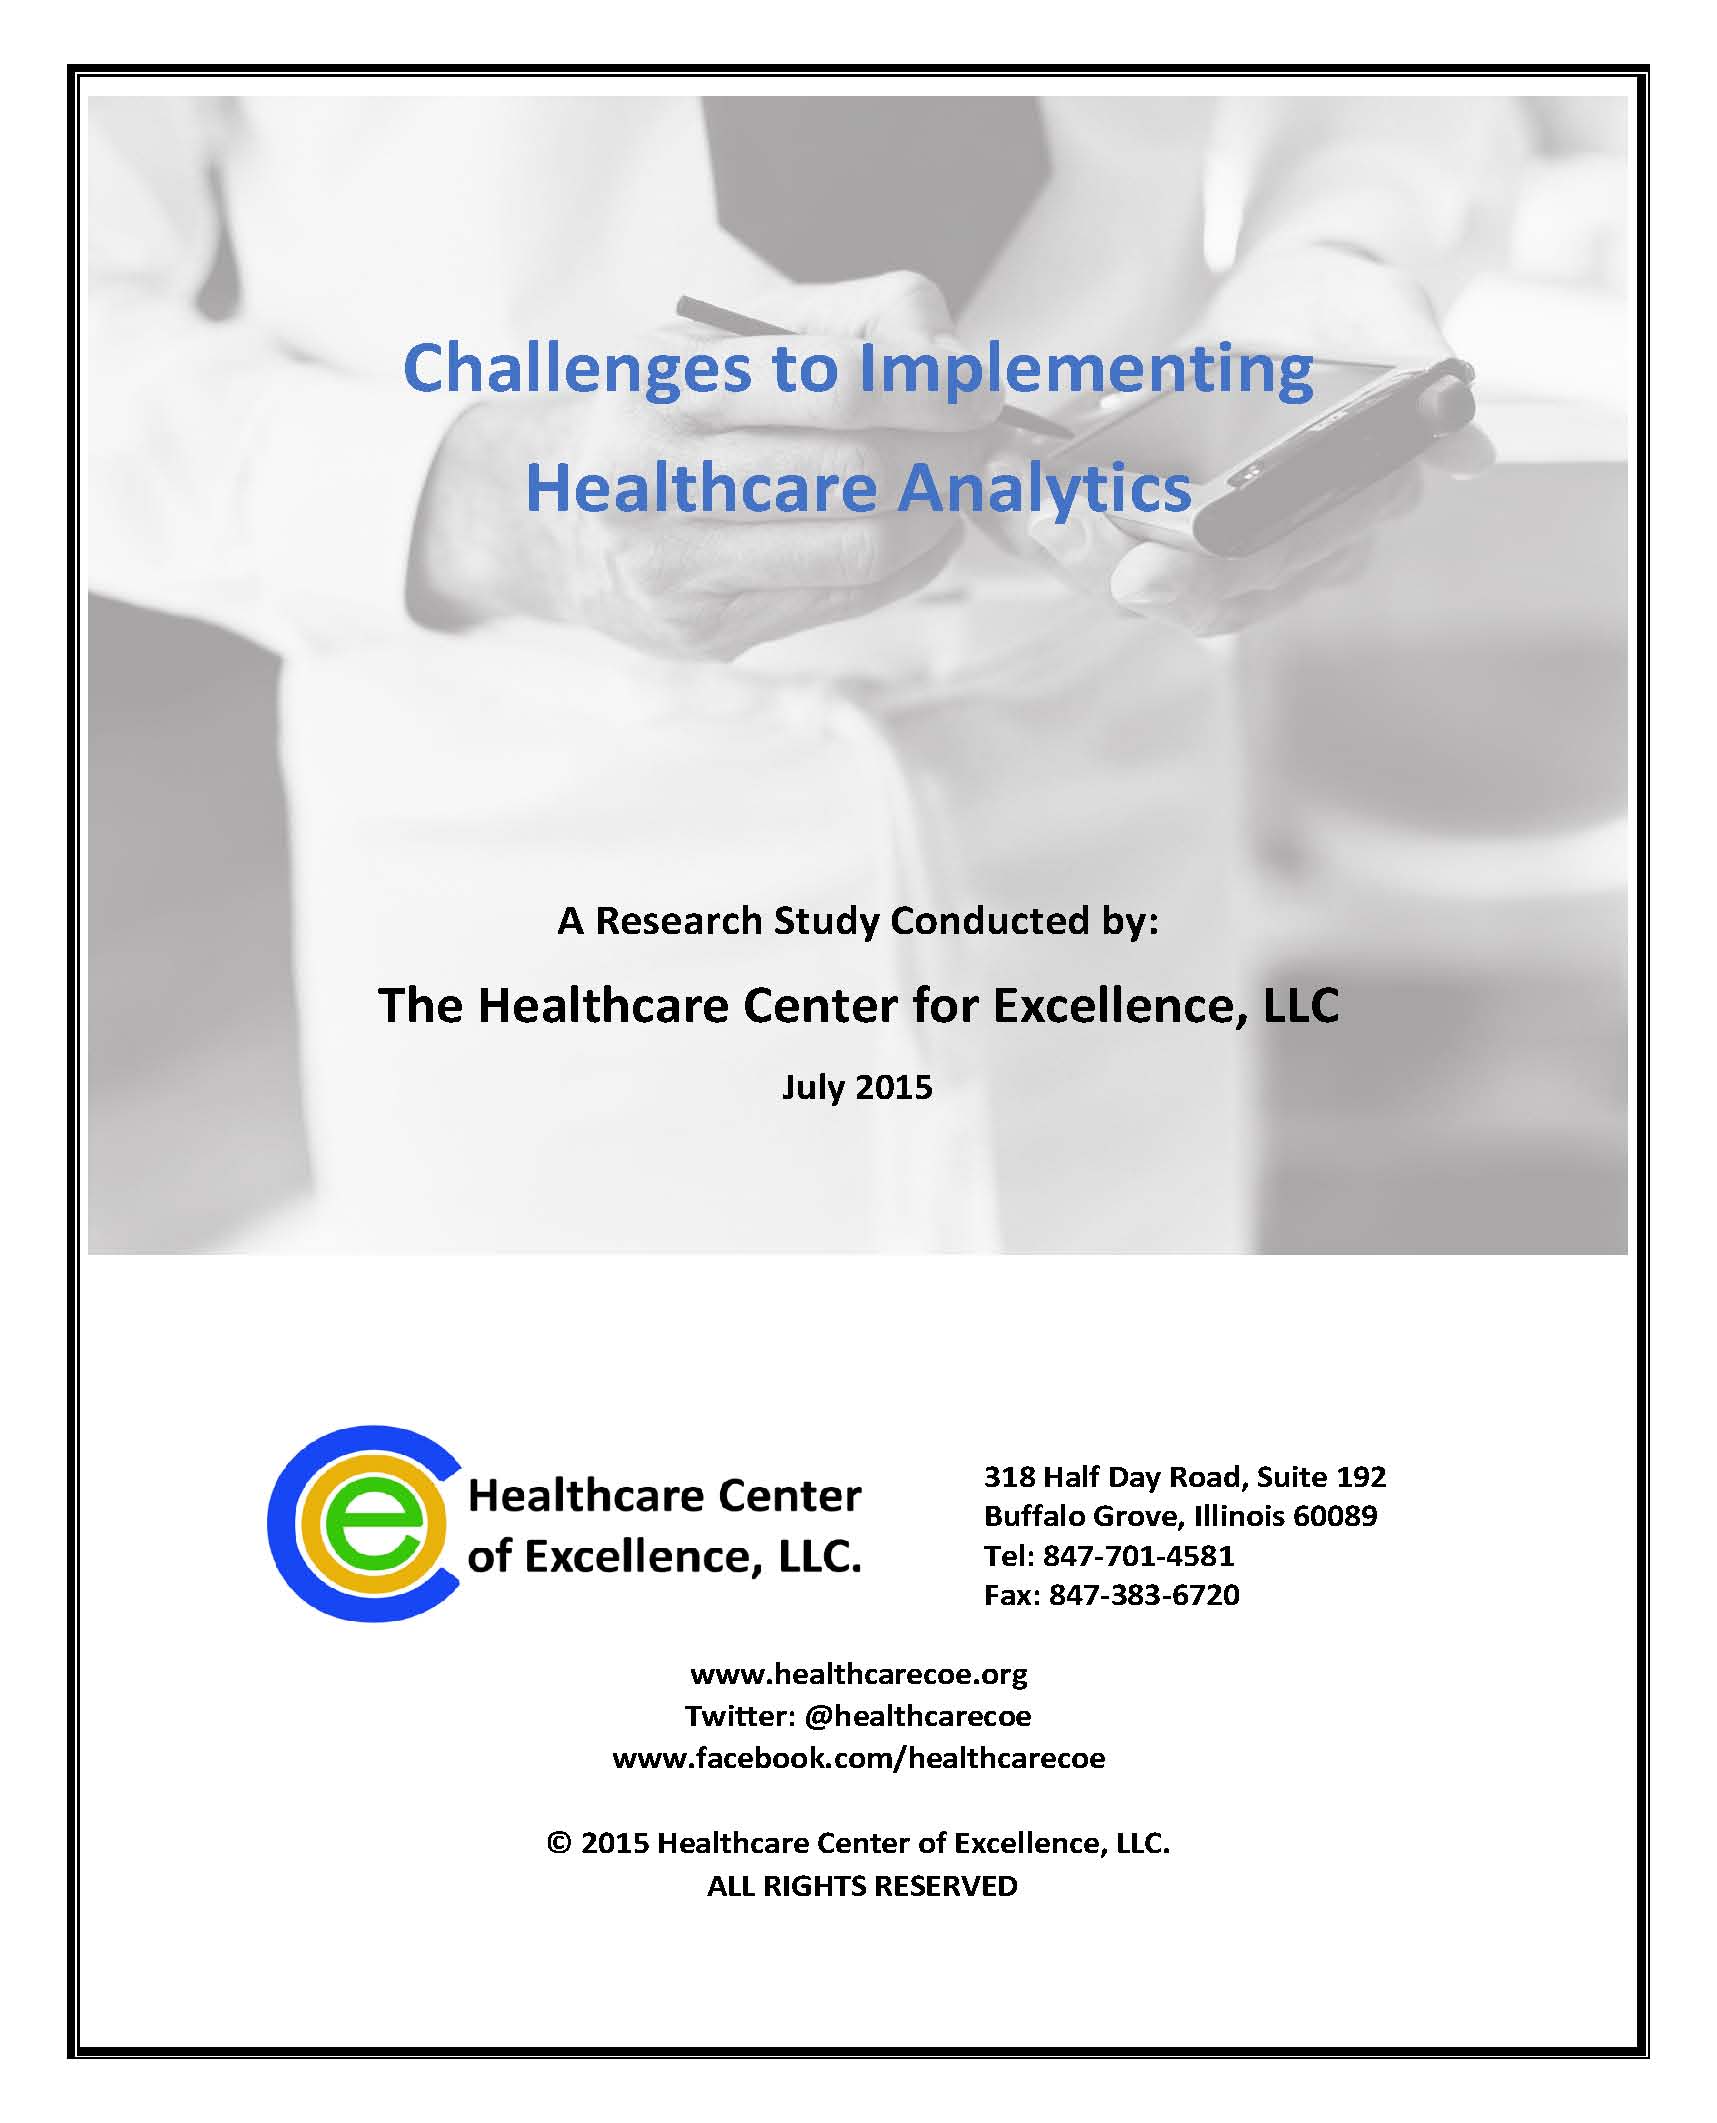 Challenges to Implementing Healthcare Analytics